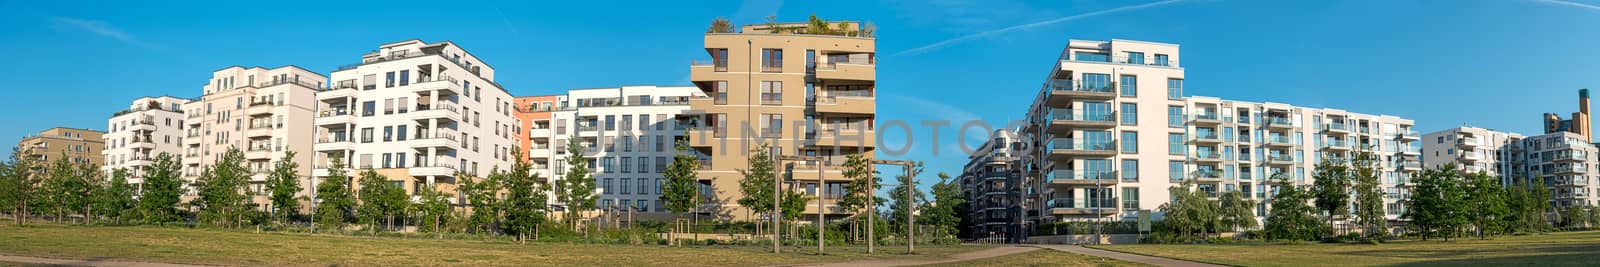 Panorama of a housing development area in Berlin, Germany